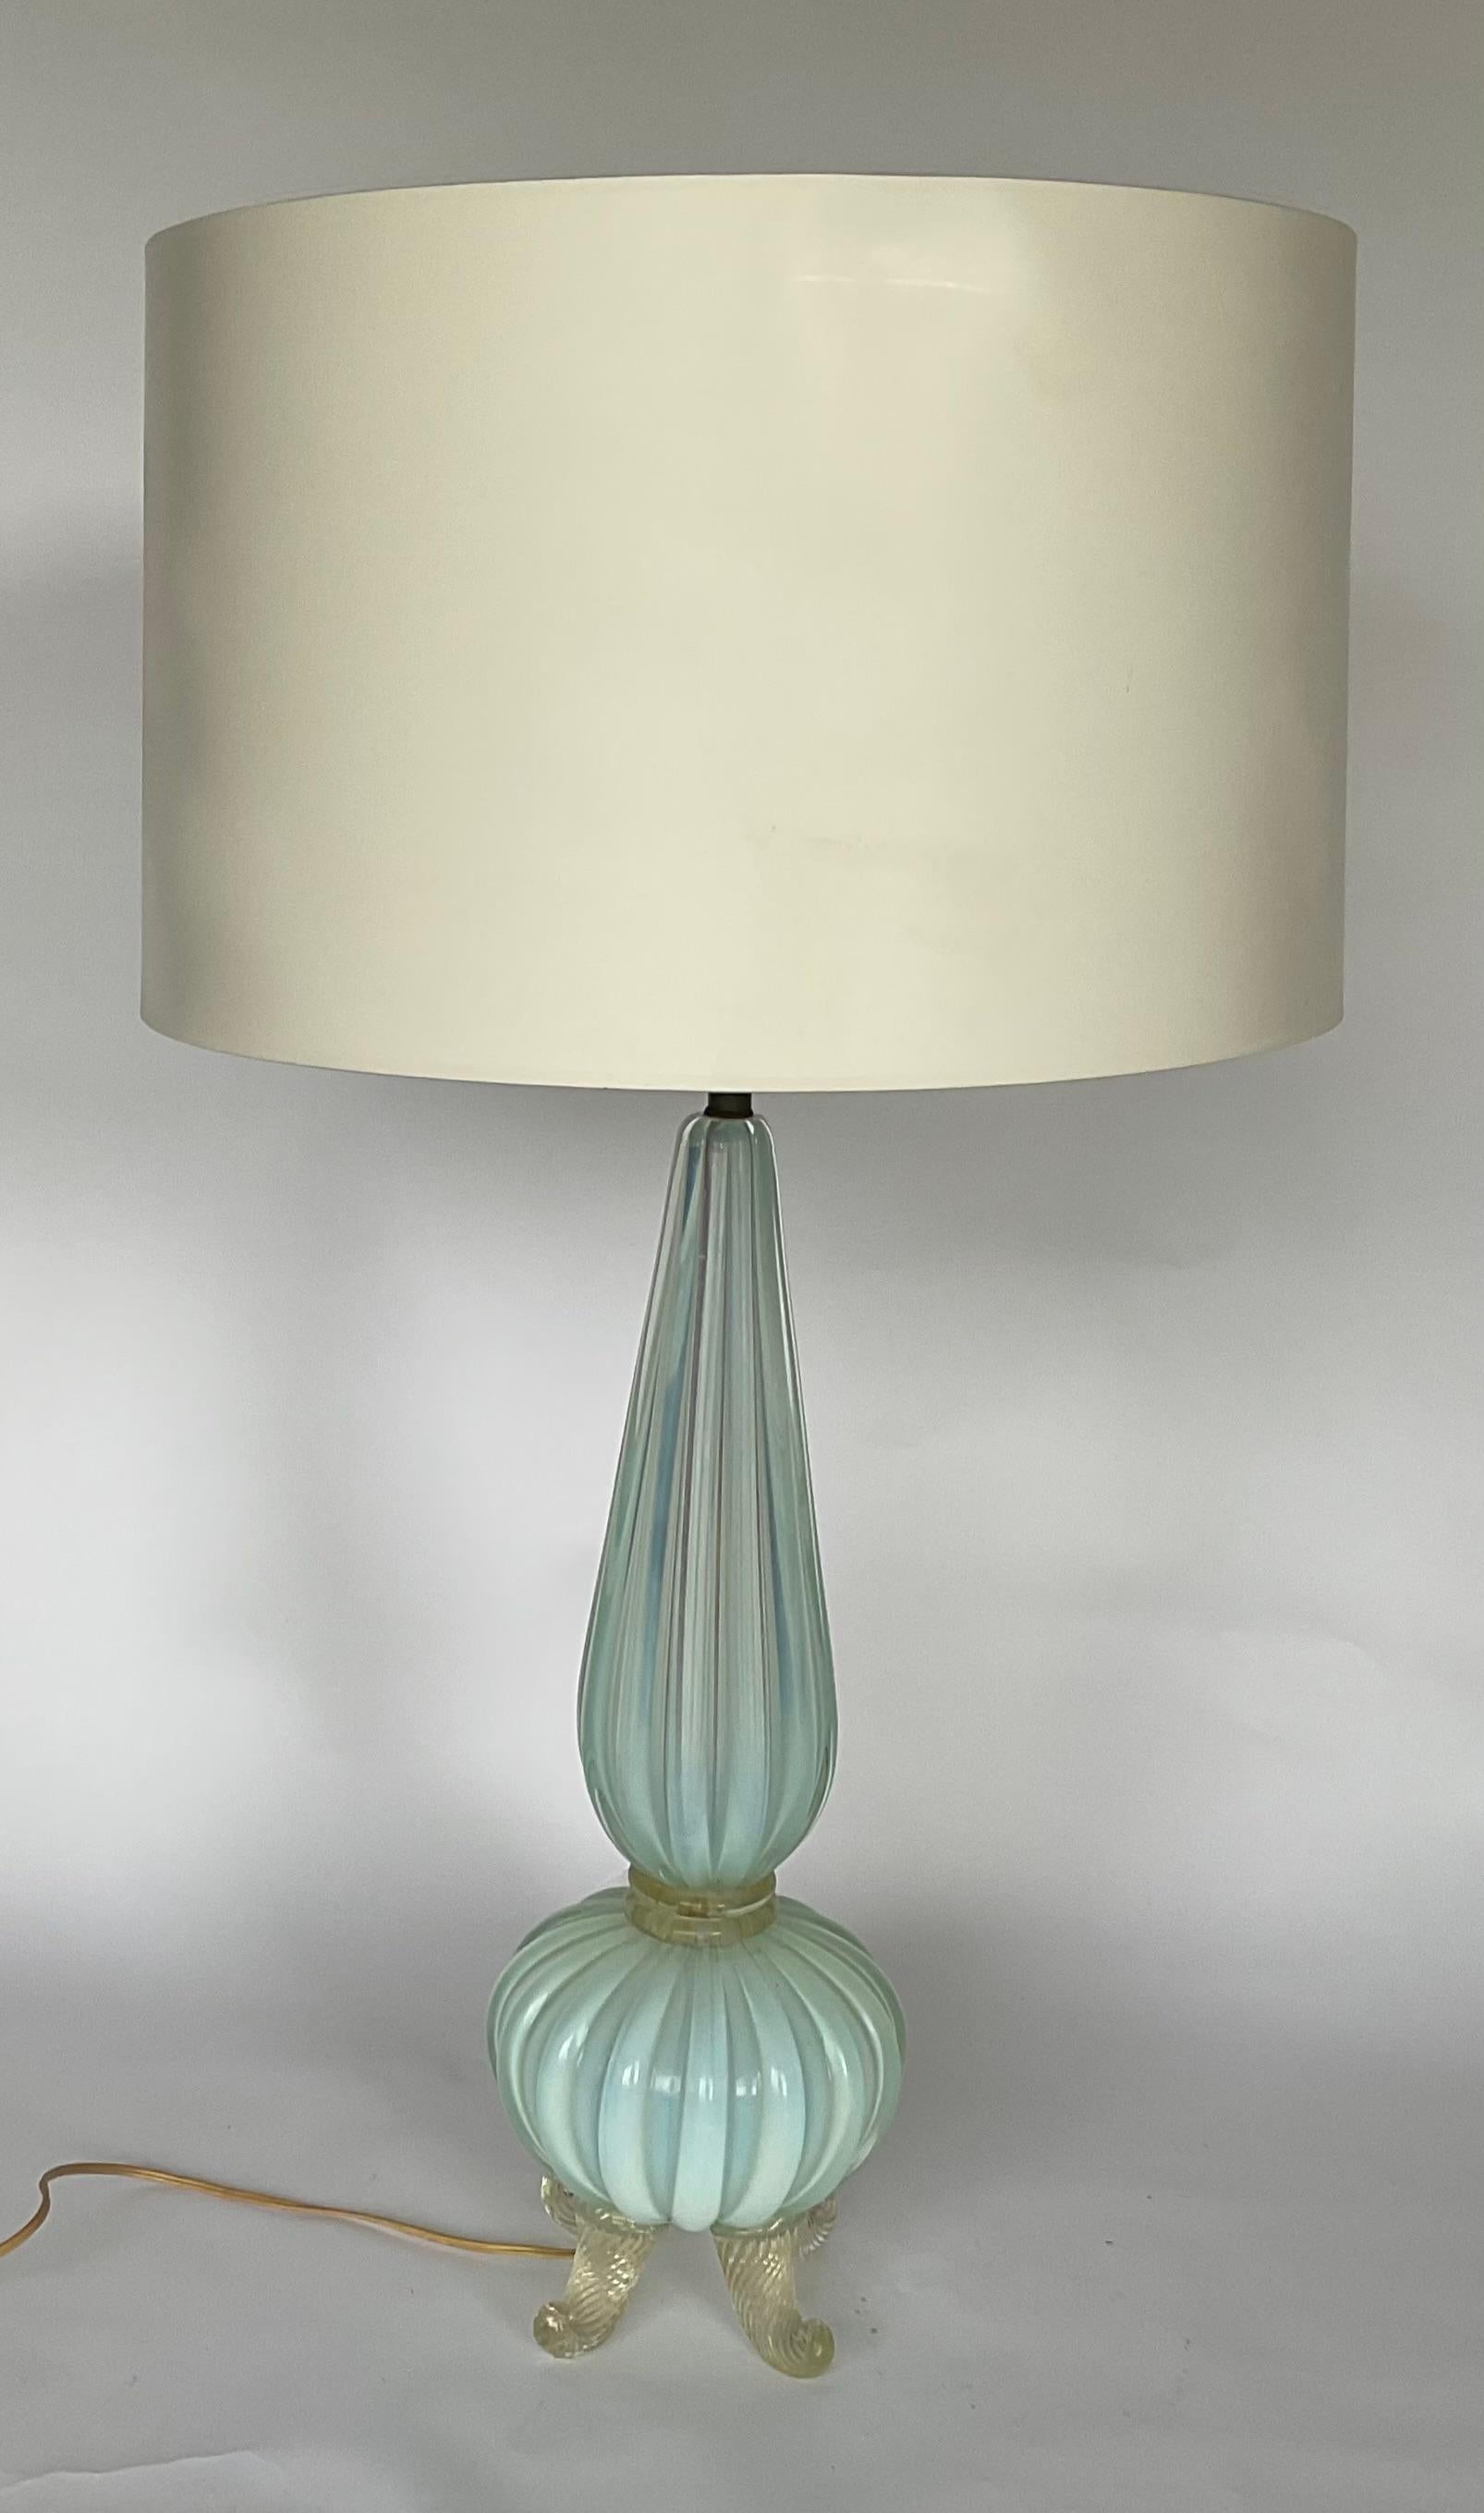 Barovier and Toso Large Murano Art Glass Lamp Opalescent with gold applied feet  In Good Condition For Sale In Ann Arbor, MI